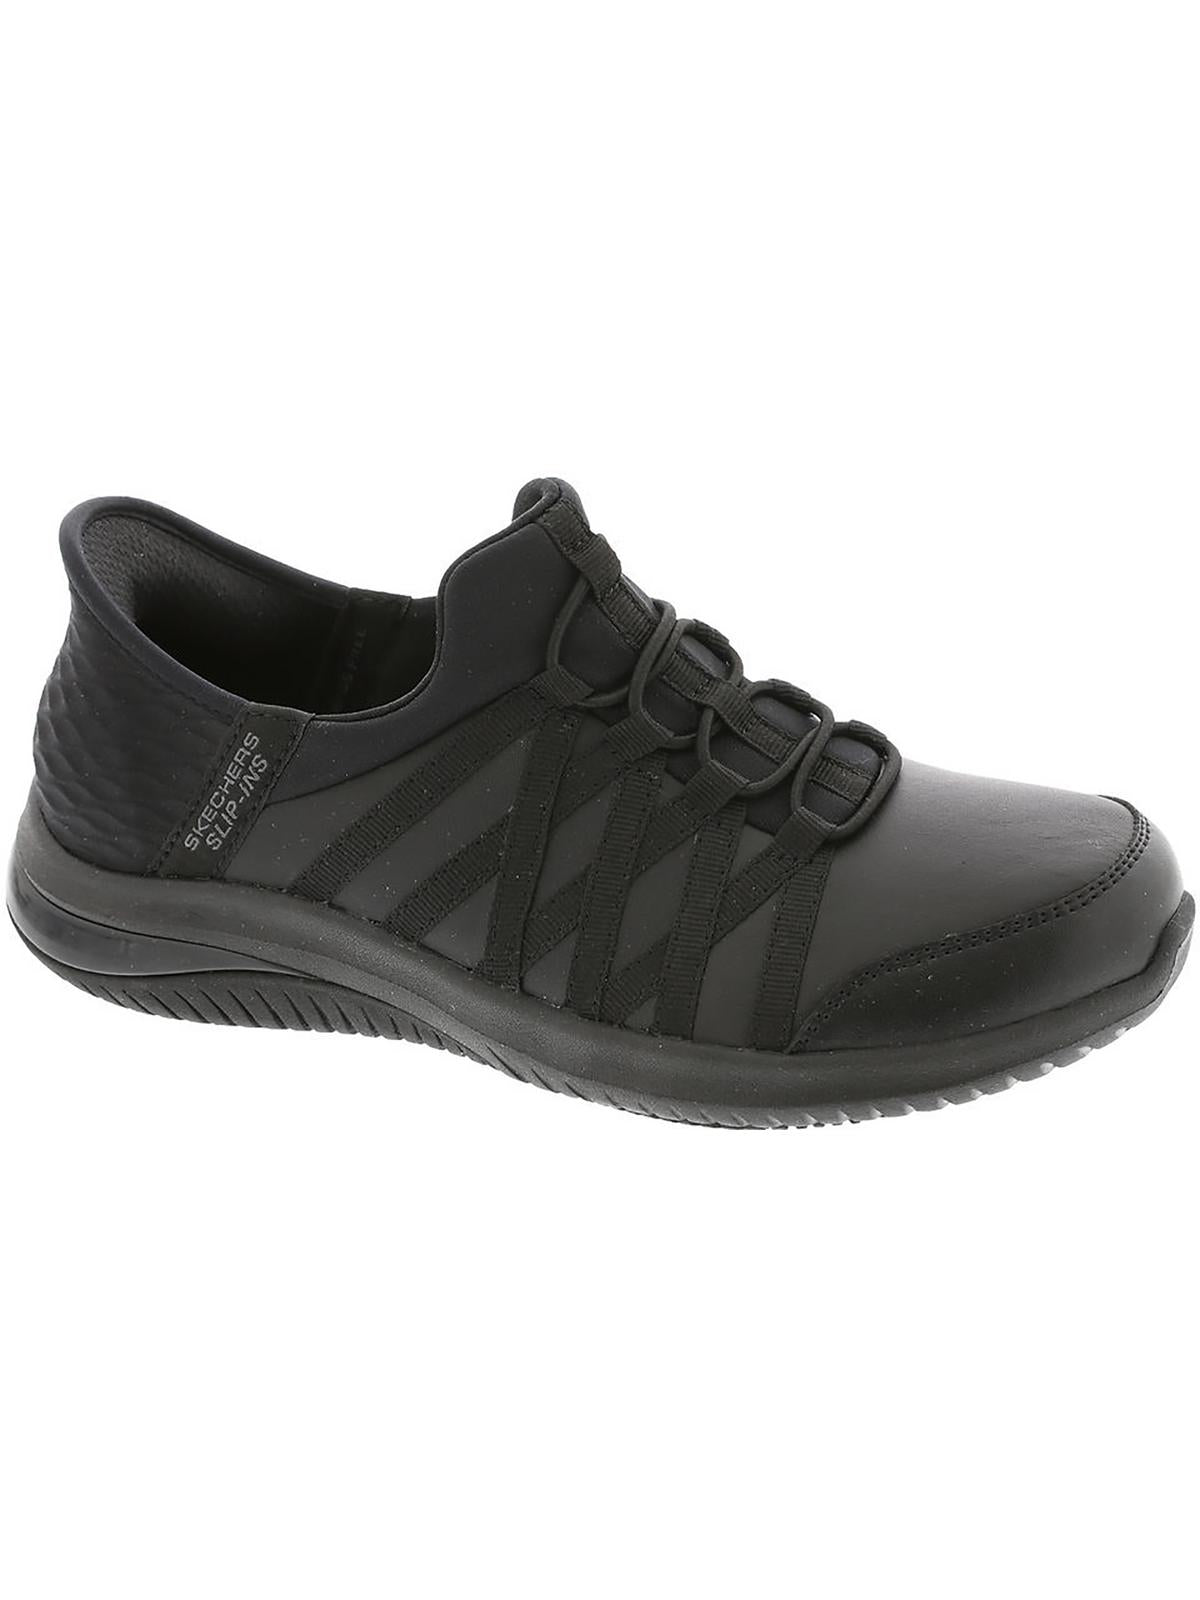 Skechers Dantey Parral Womens Laceless Leather Work & Safety Shoes In Black